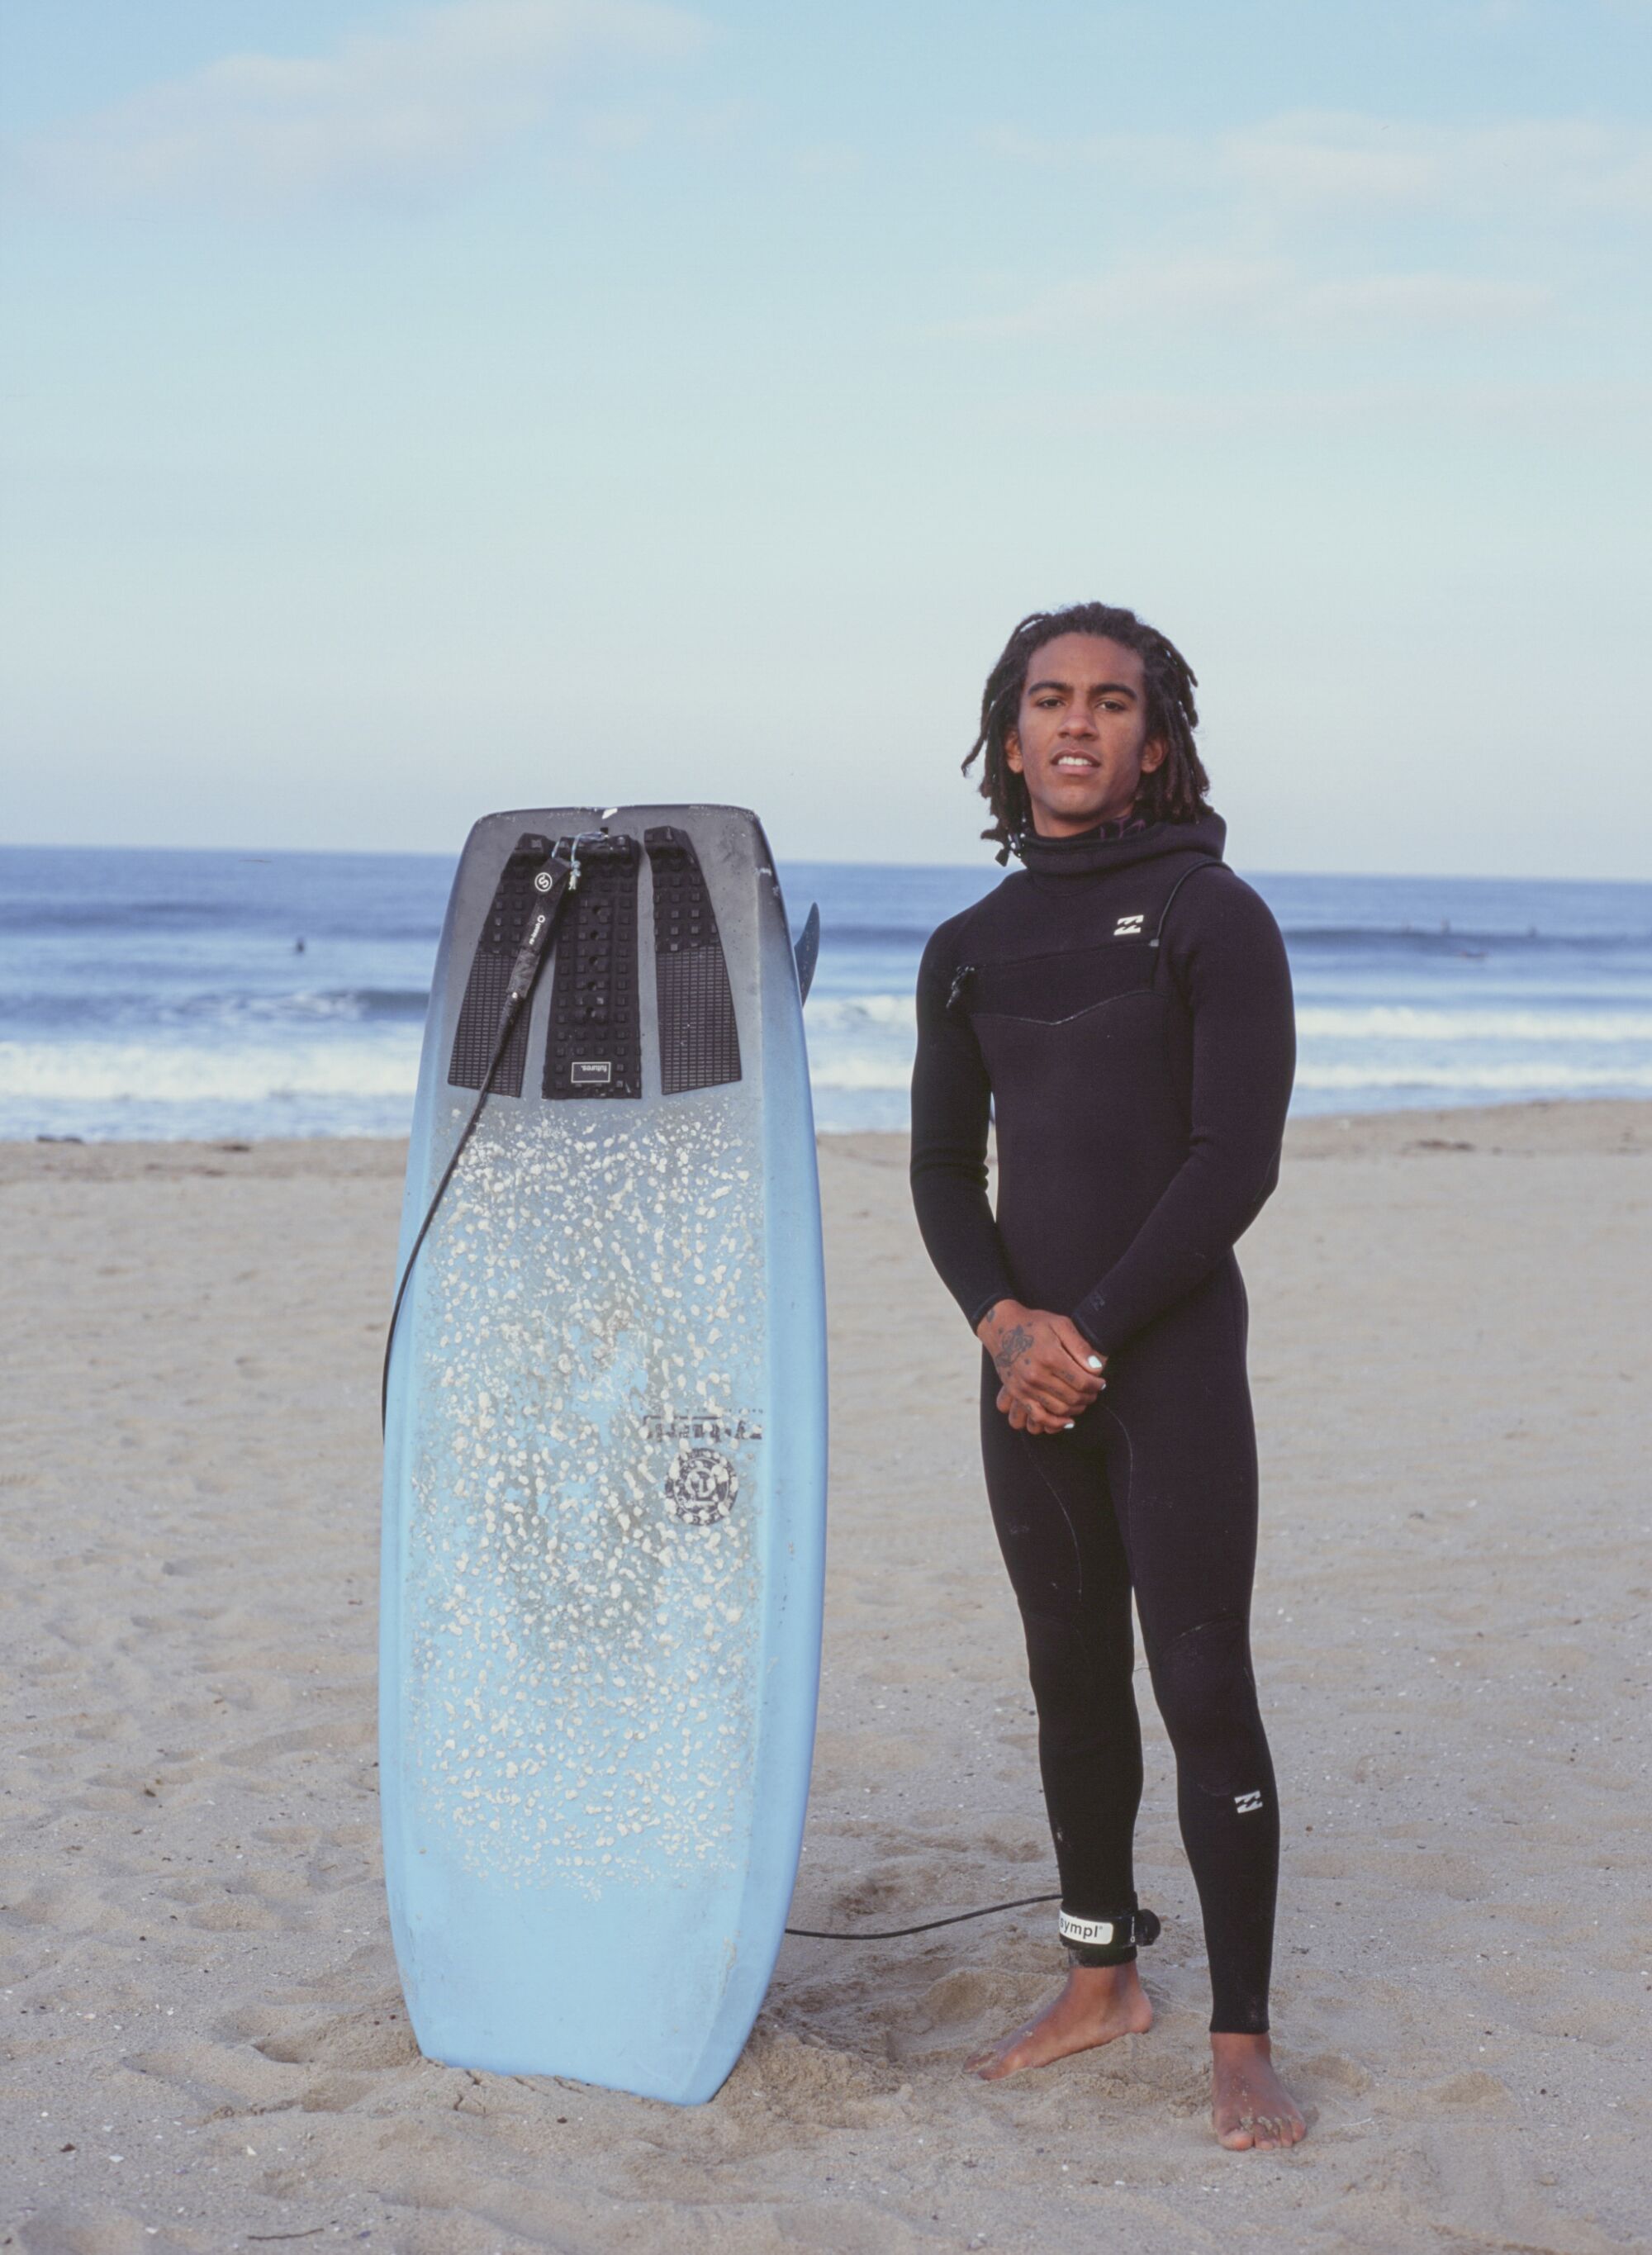 Gage Crismond poses a portrait before a morning surf session on Saturday, March 13, 2021.